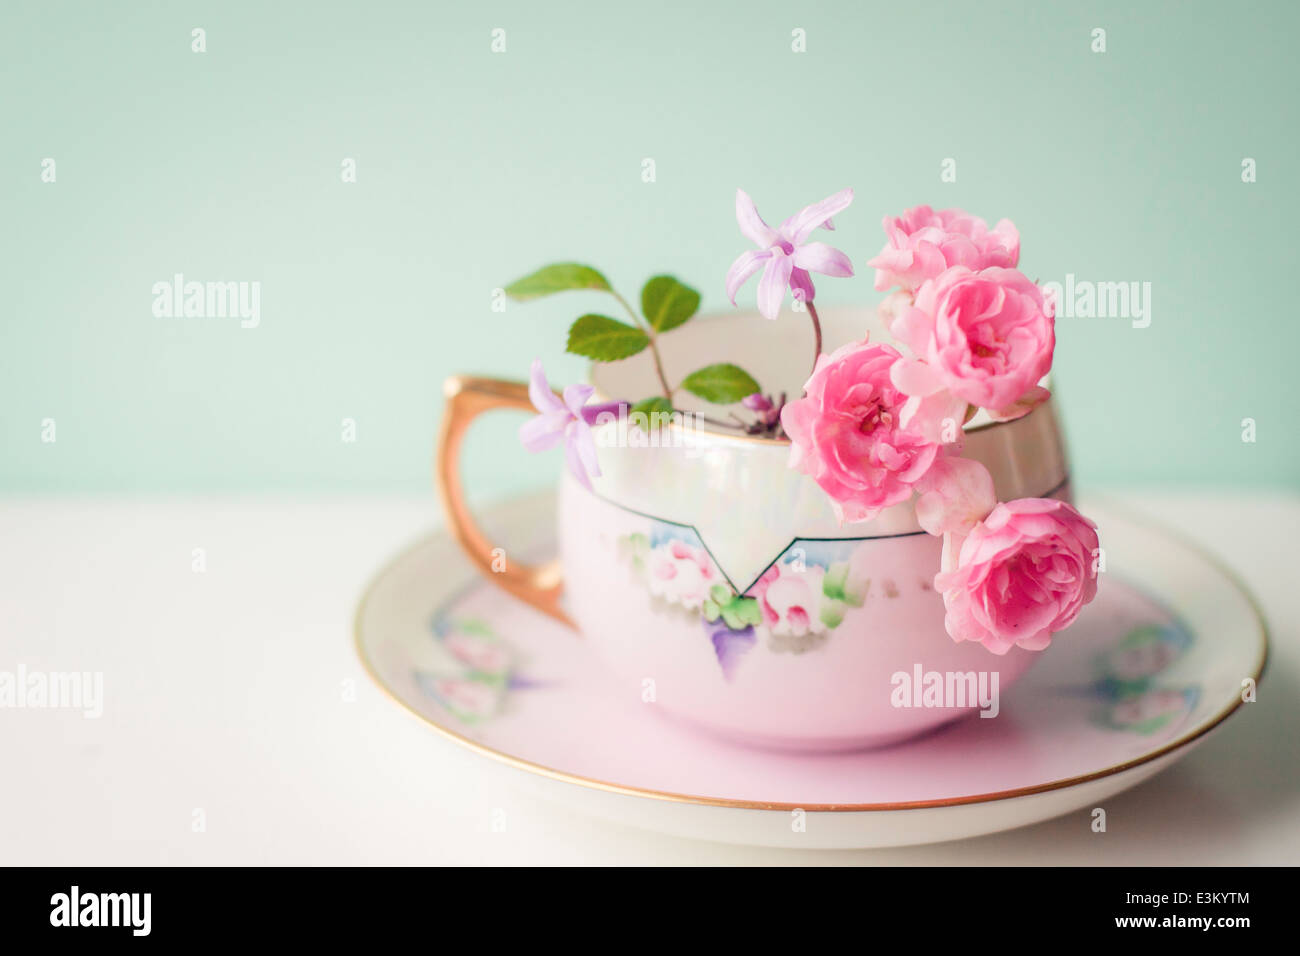 Picture of teacup with flowers inside Stock Photo